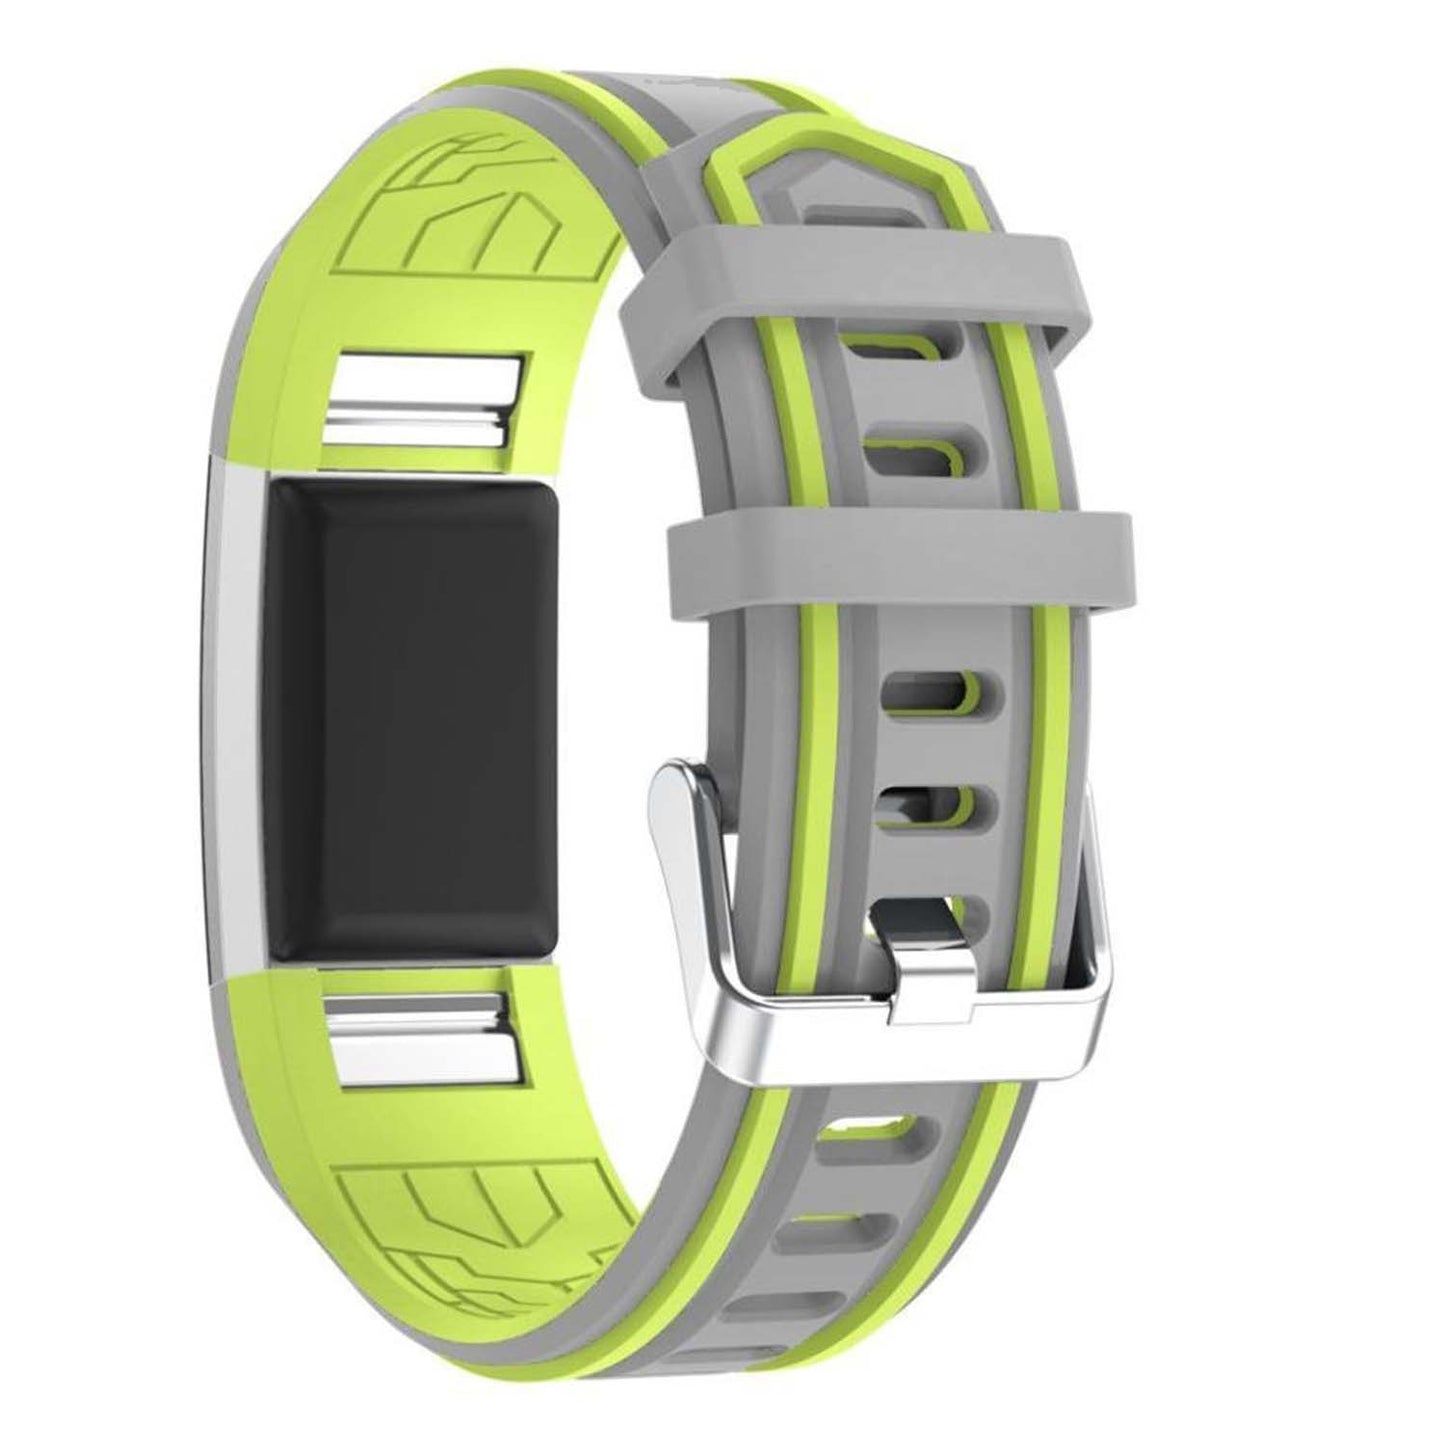 Racing Stripe RubberBand for Fitbit Charge 2